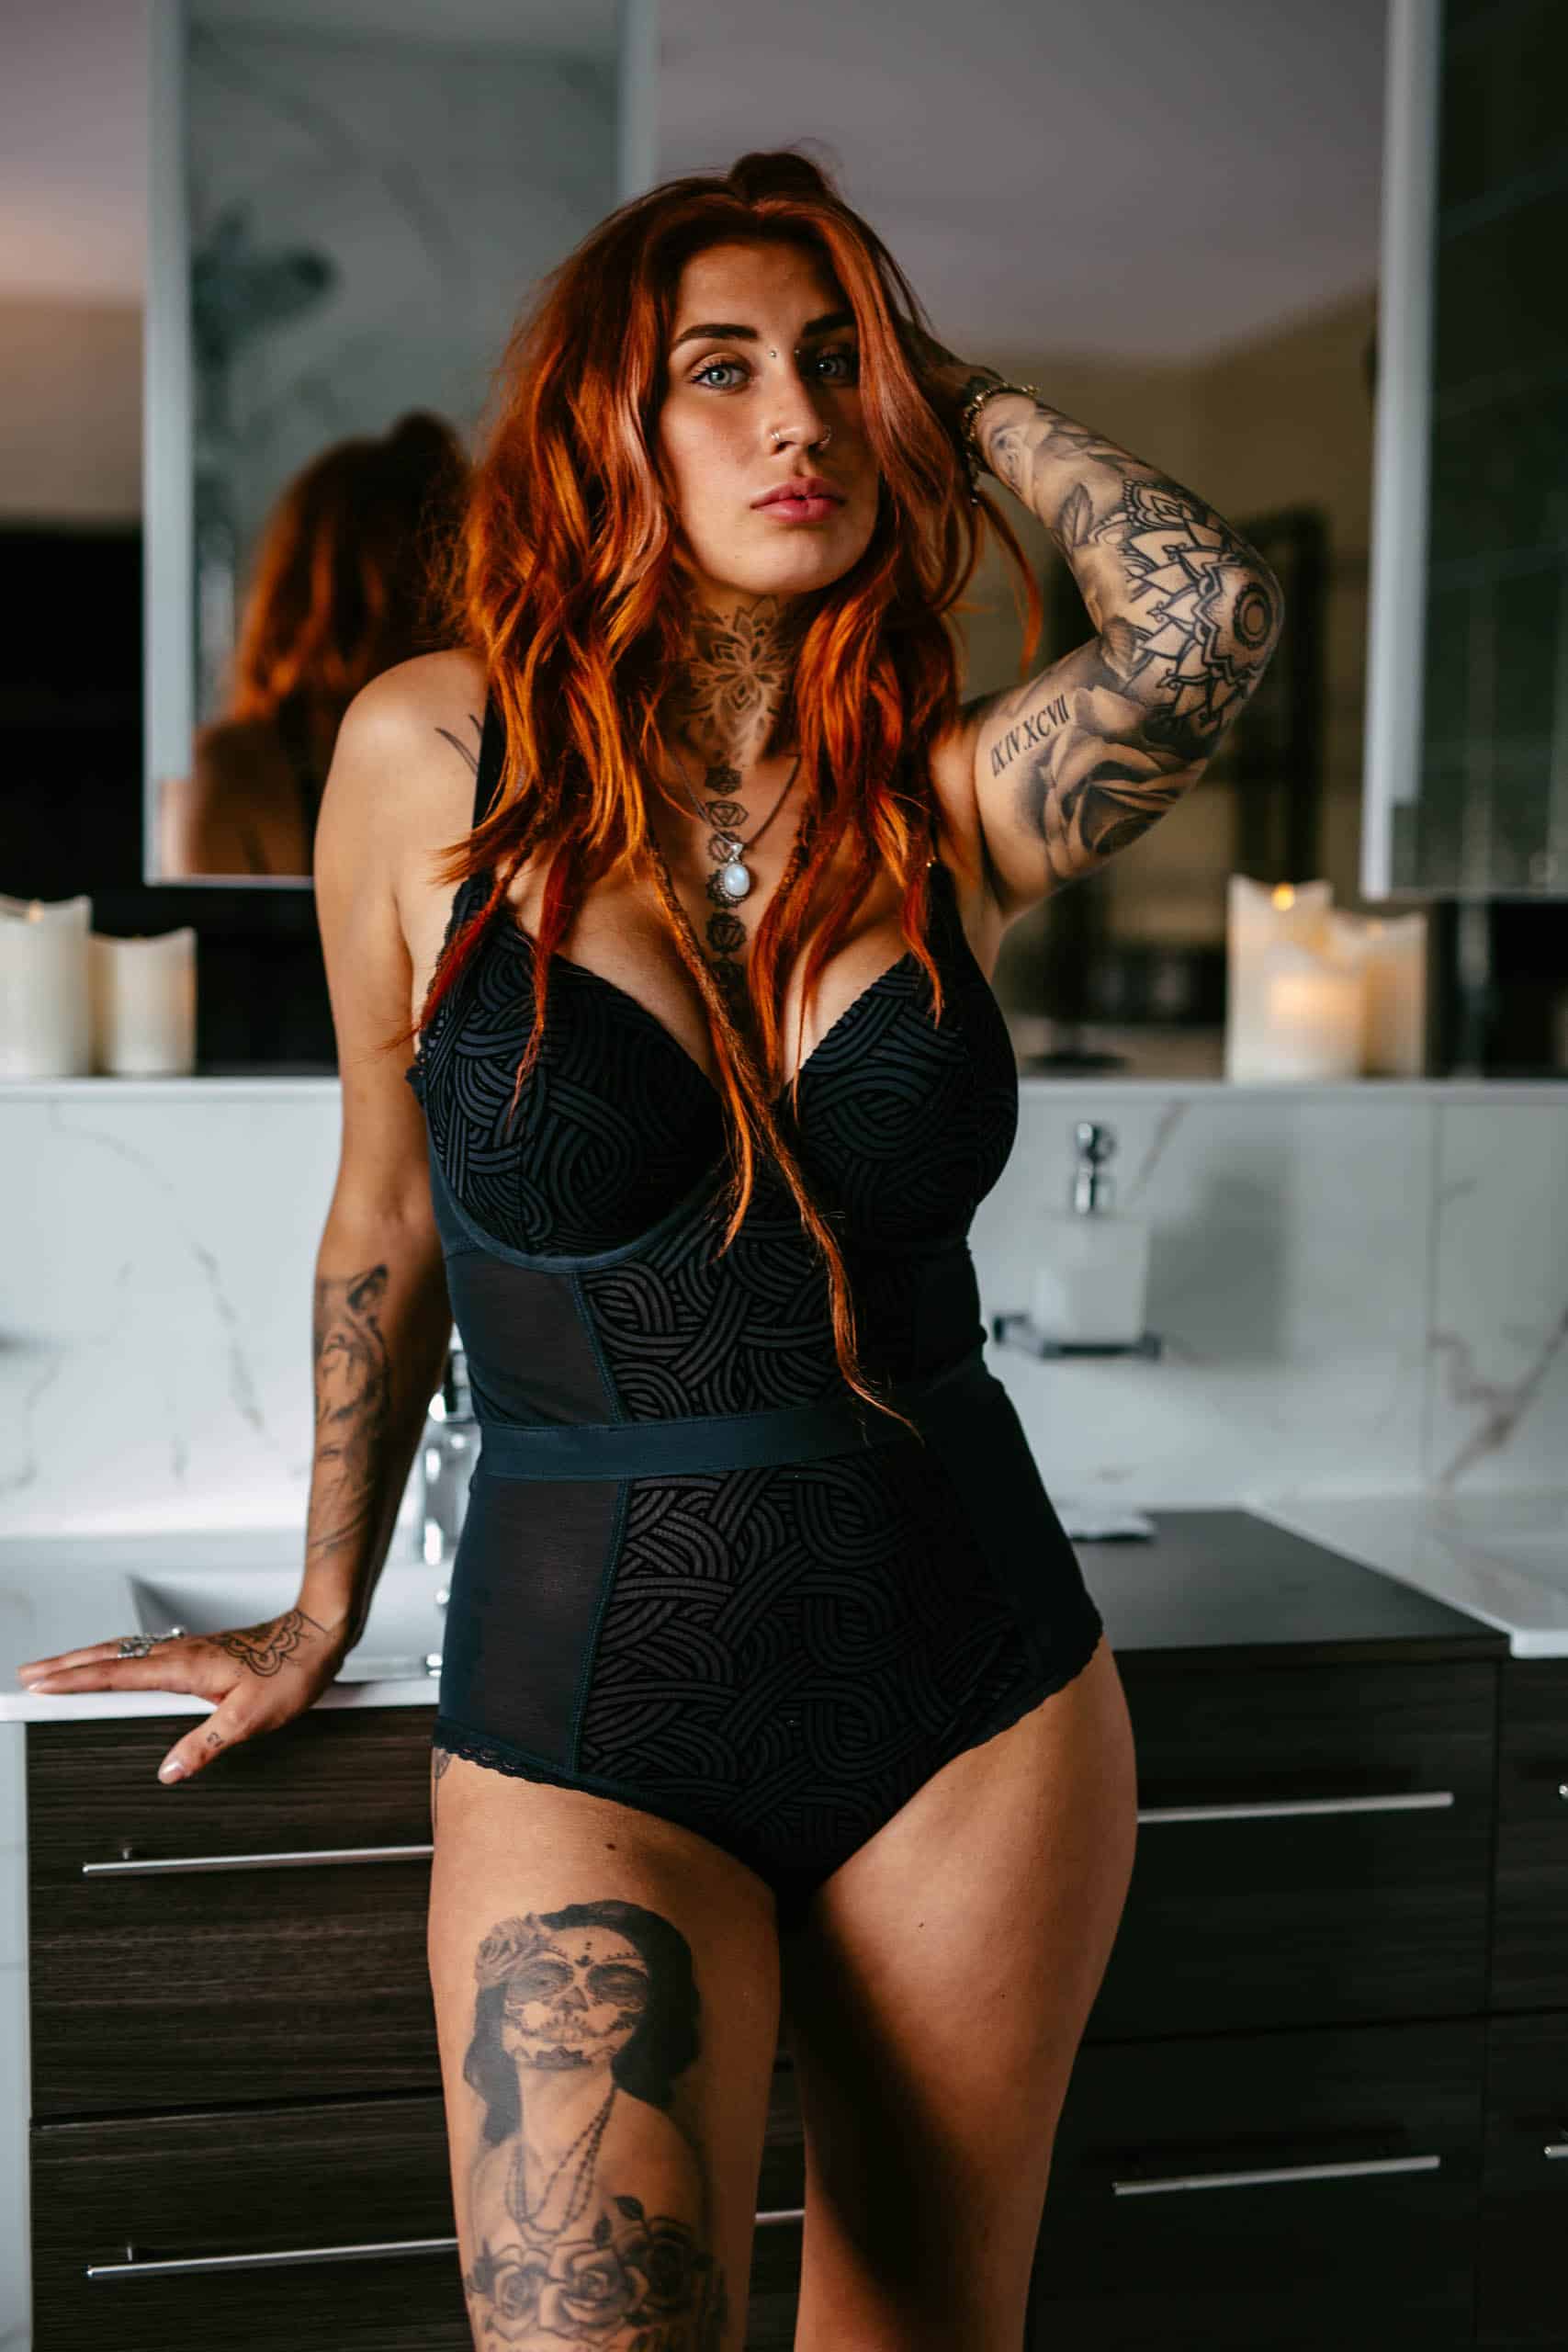 A woman with red hair and tattoos poses in a bathroom during a boudoir shoot.